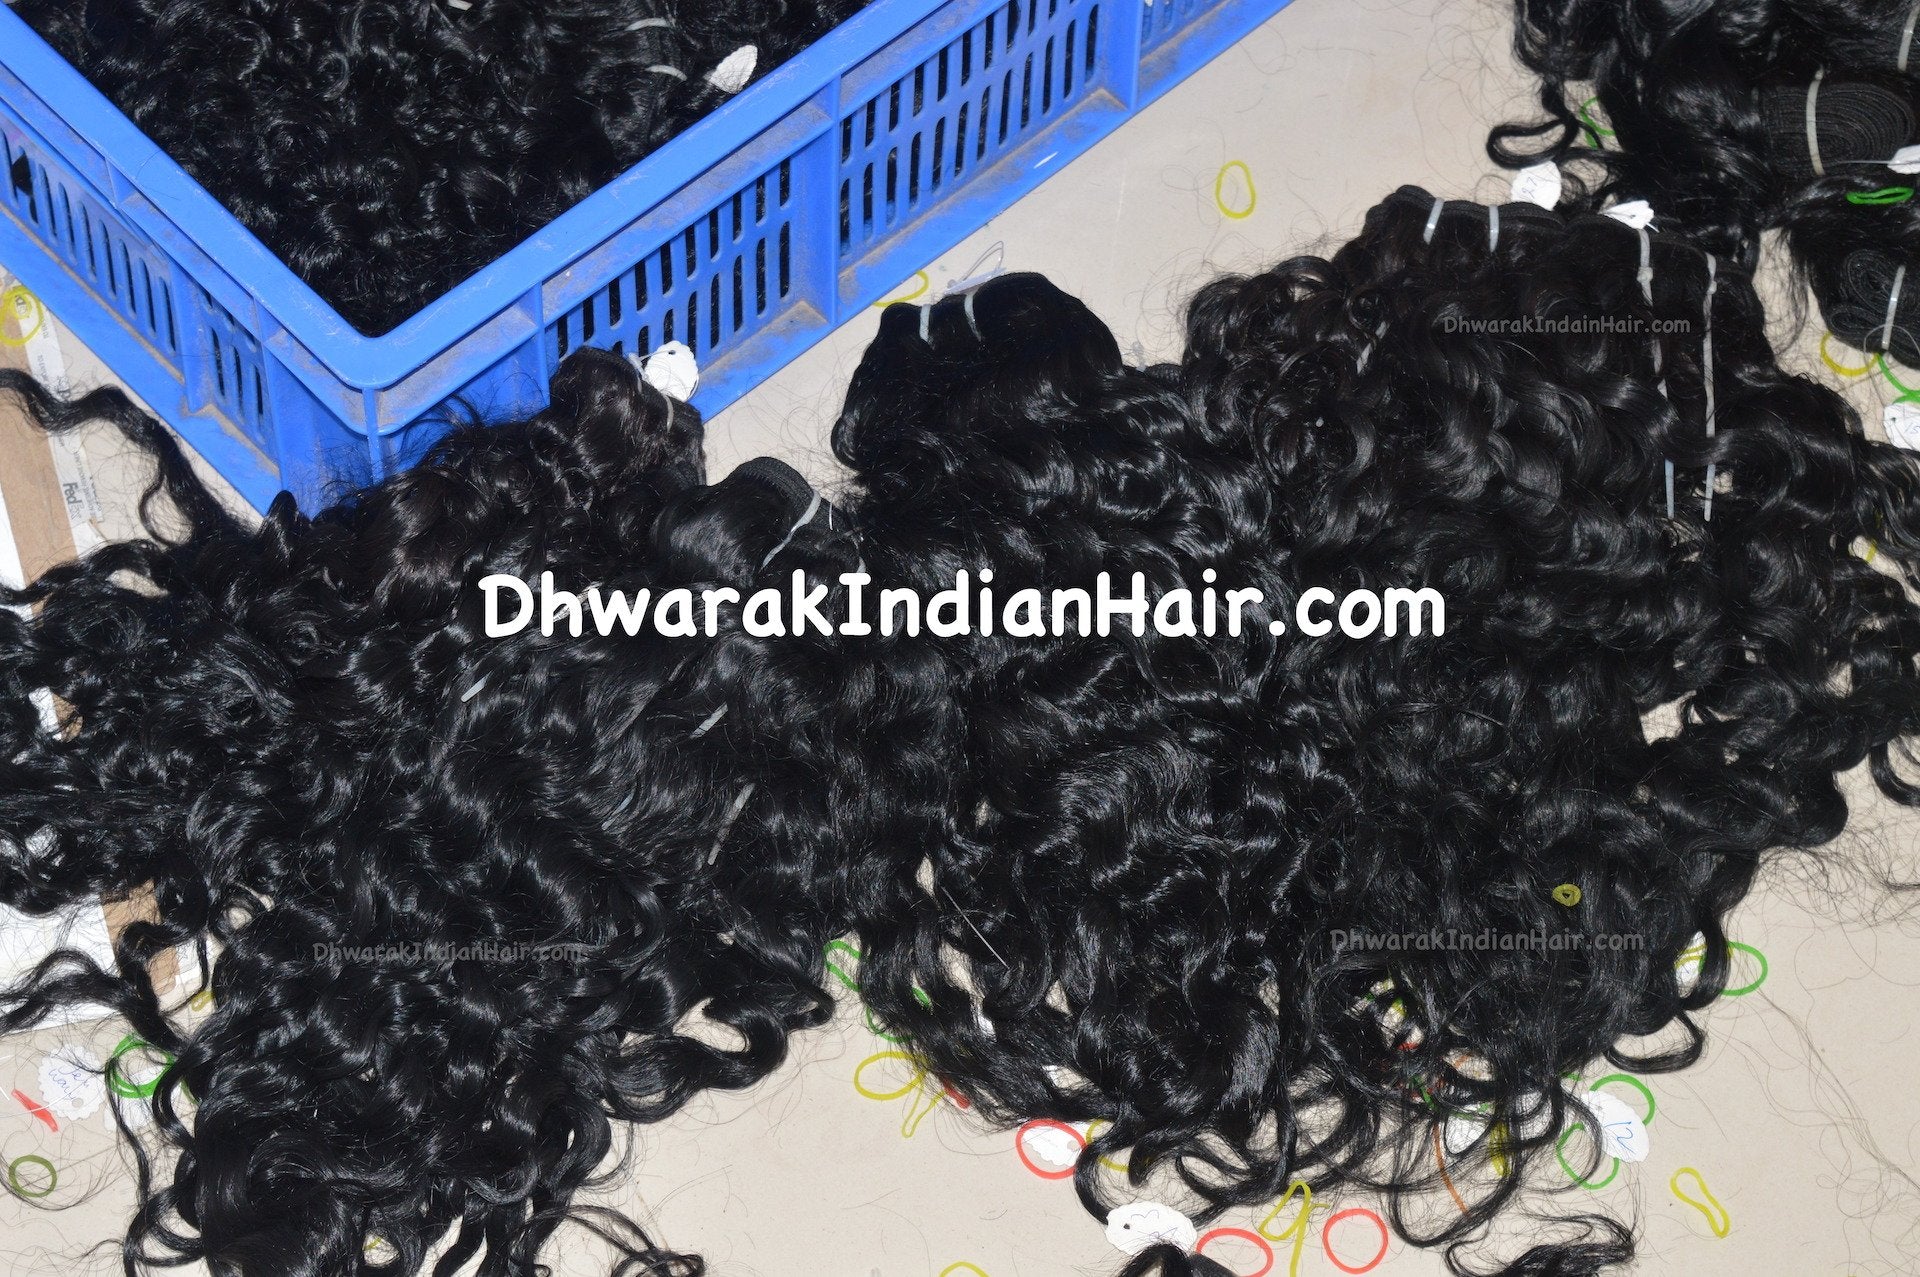 BUY RAW INDIAN TEMPLE HAIR EXTENSIONS WHOLESALE FROM DHWARAK INDIAN HAIR FACTORY, INDIA